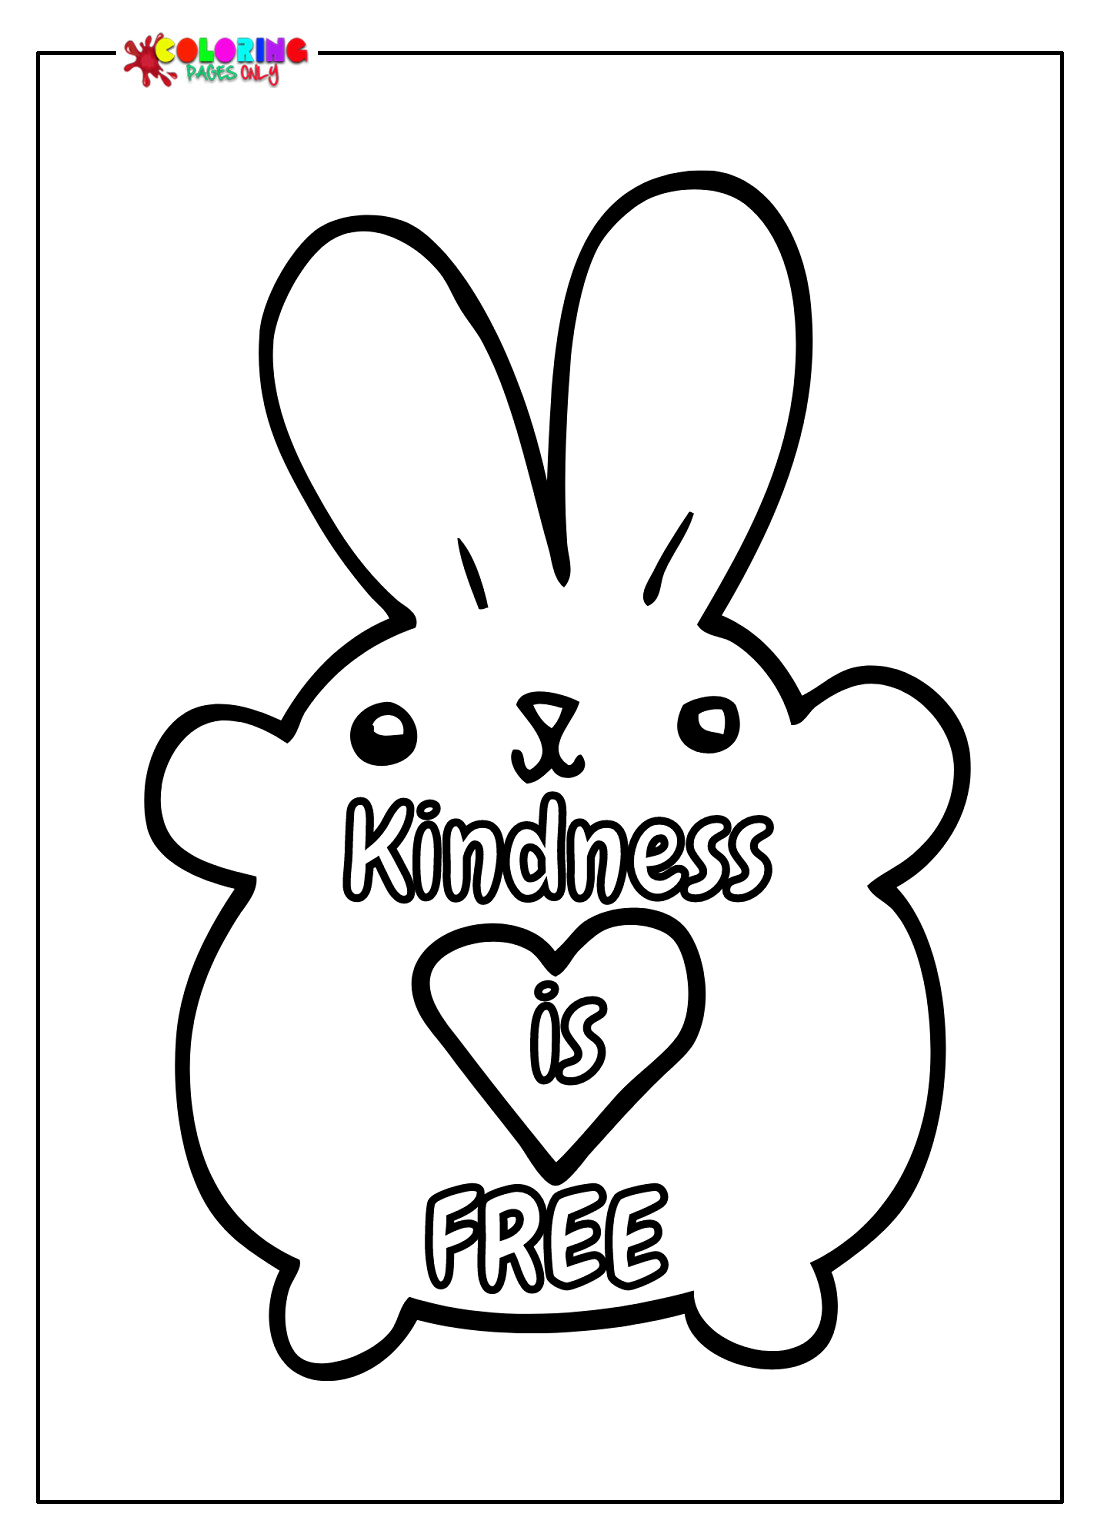 Kindness is Free Coloring Pages